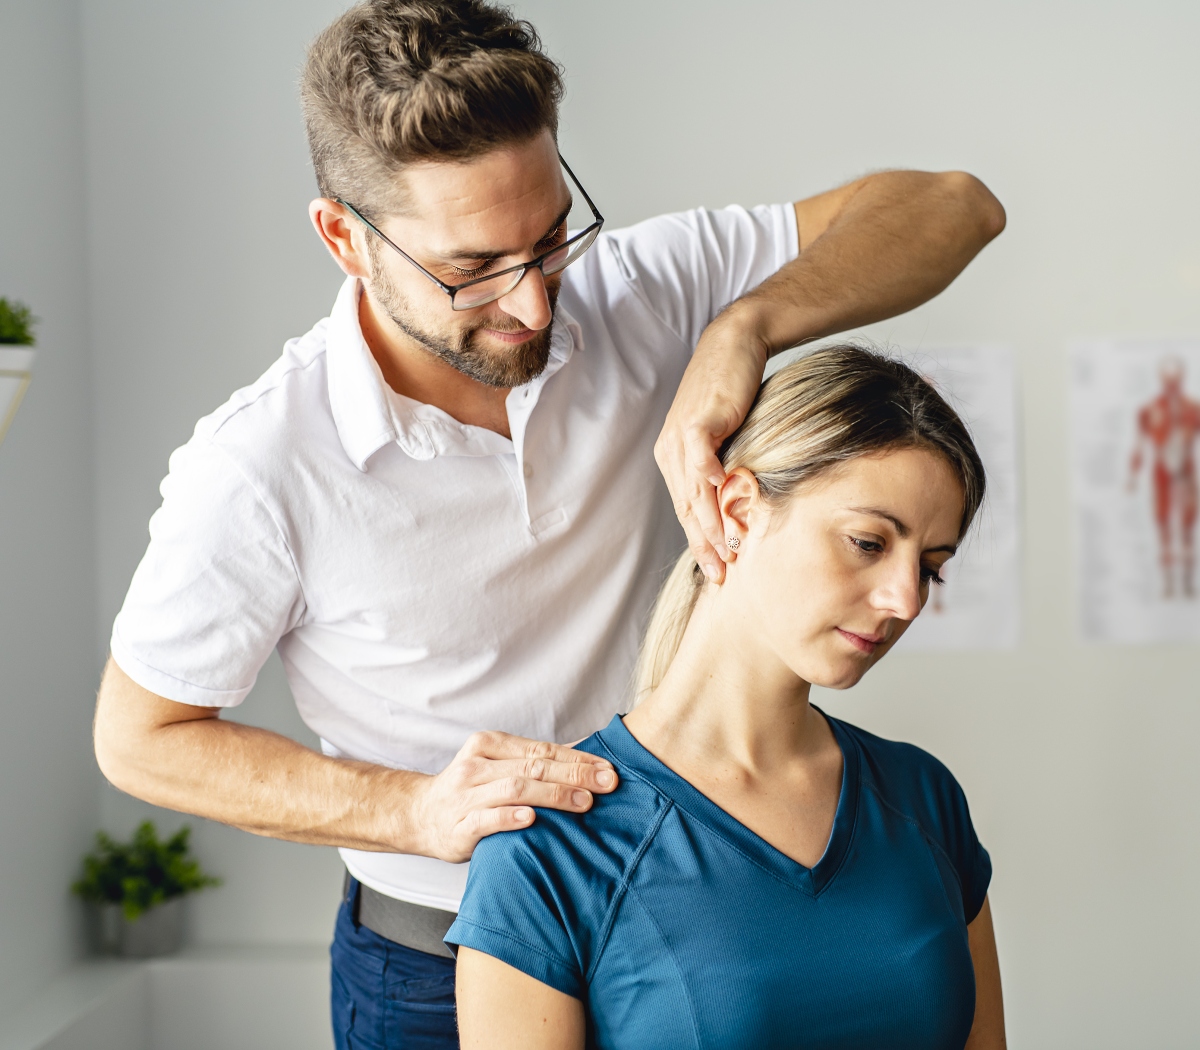 8 Chiro Marketing Tactics to Become Patients’ Top Choice